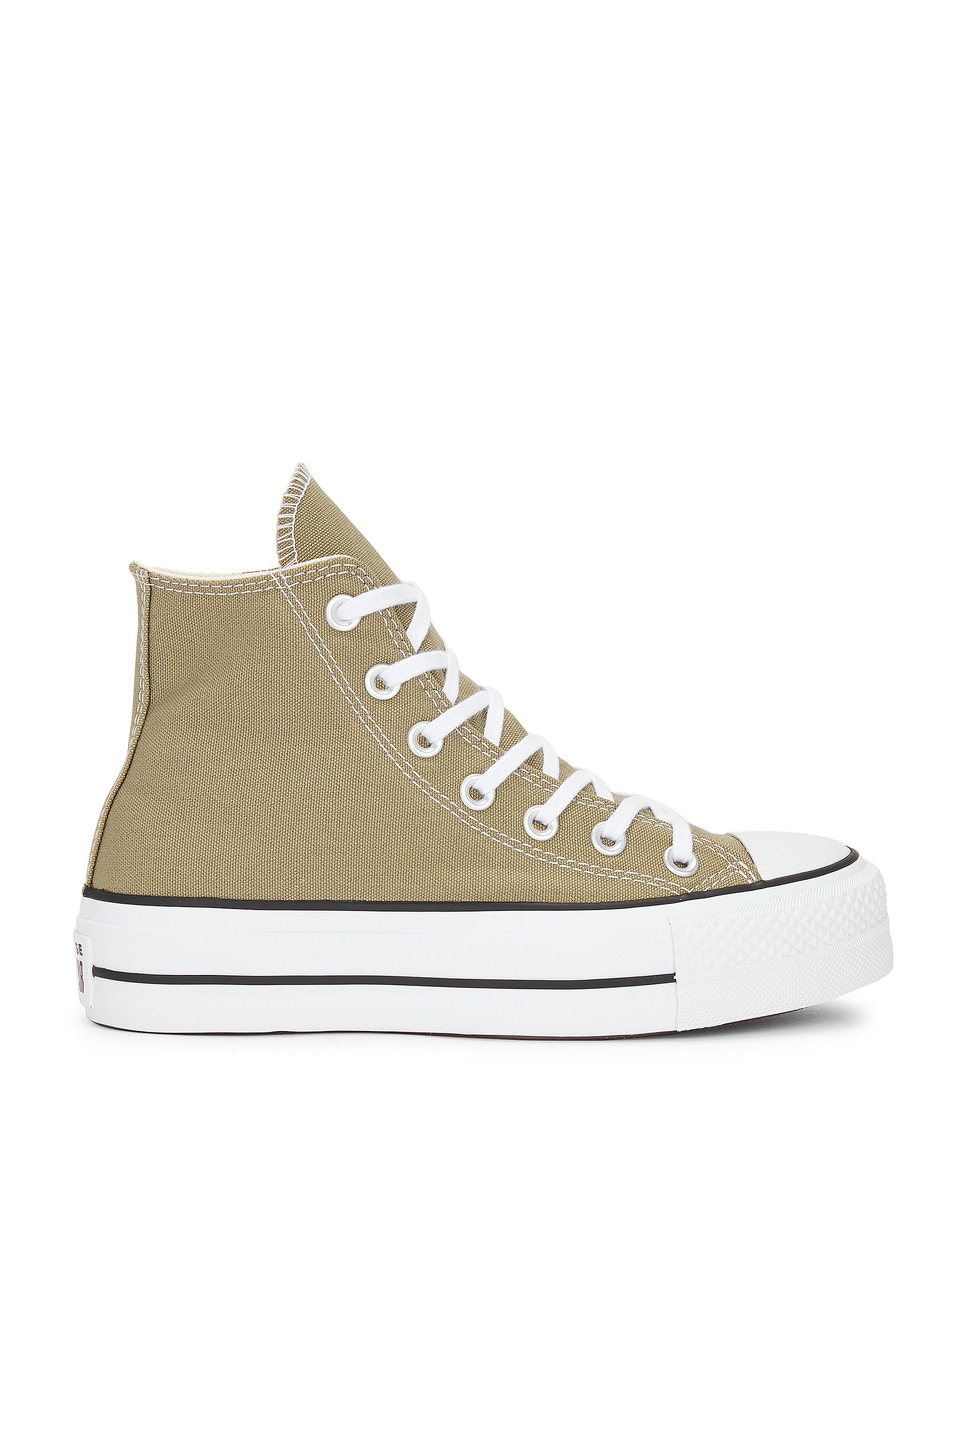 Image 1 of Converse Chuck Taylor All Star Lift High Top in Mossy Sloth, White, & Black